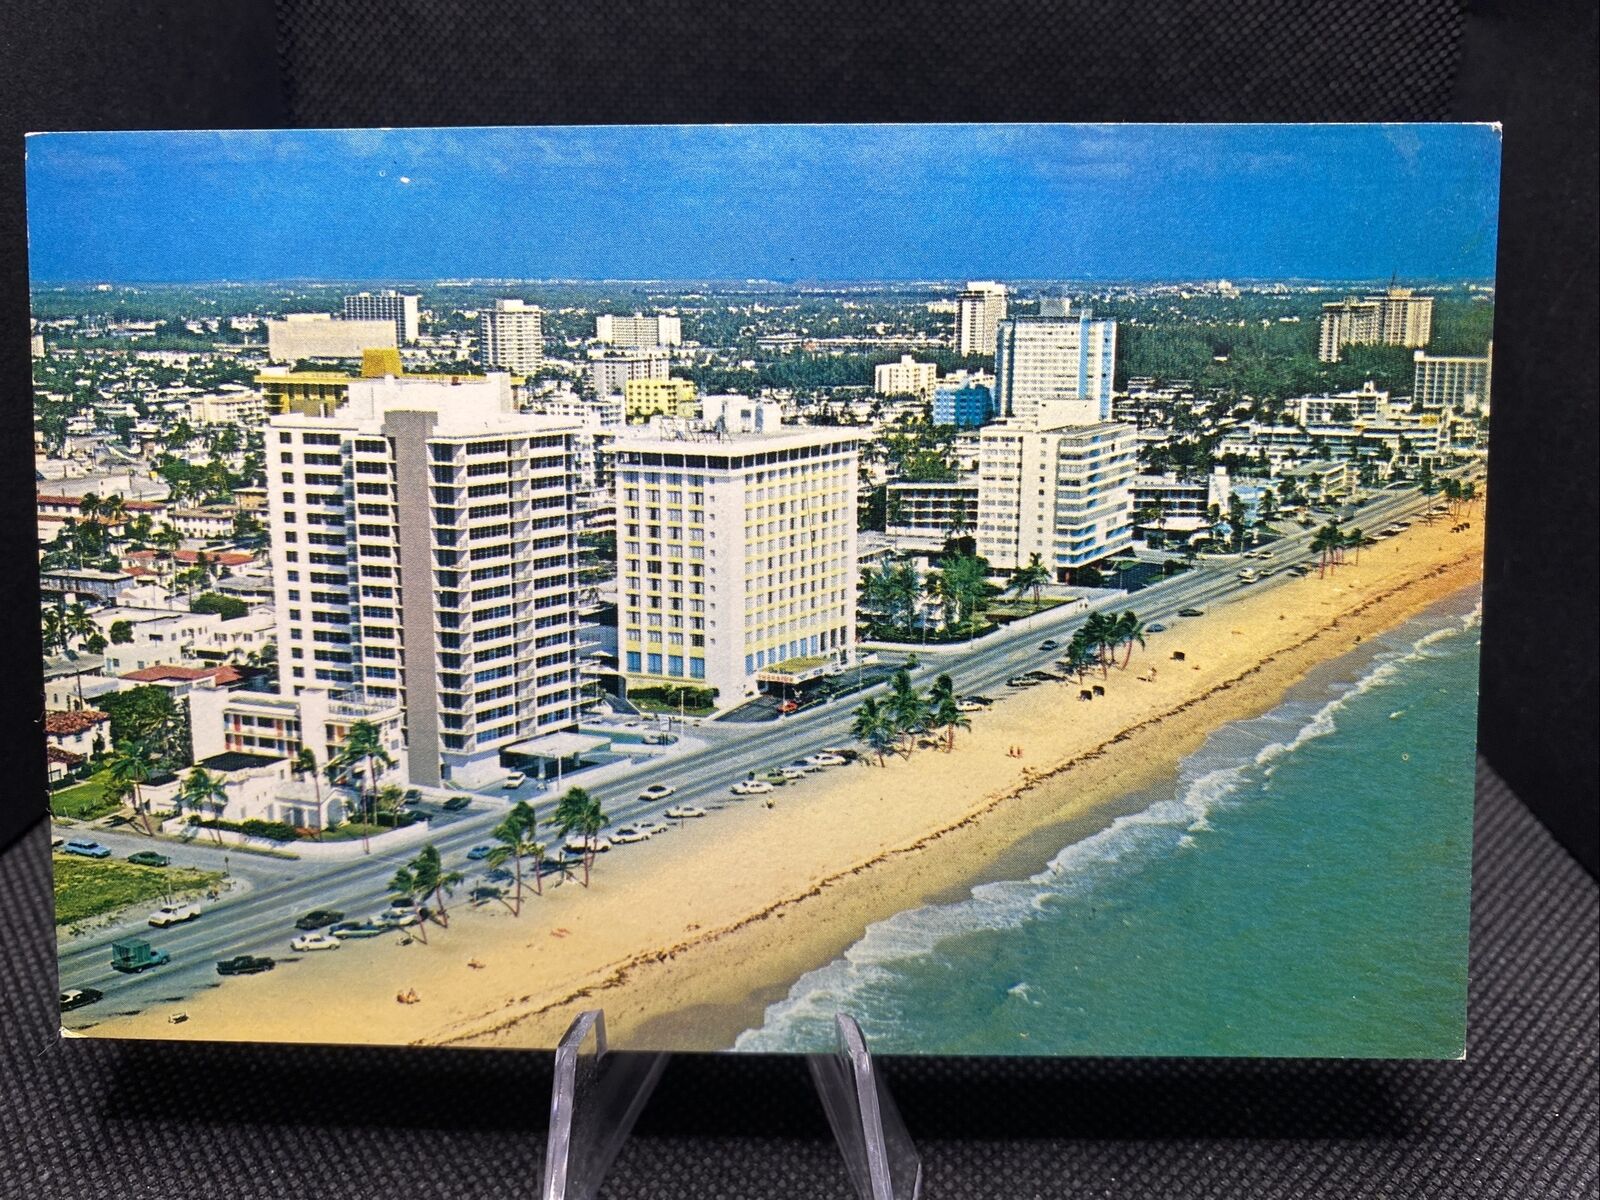 POSTCARD: Aerial View Luxury Hotels Along Beach Fort Lauderdale Florida L9 ￼